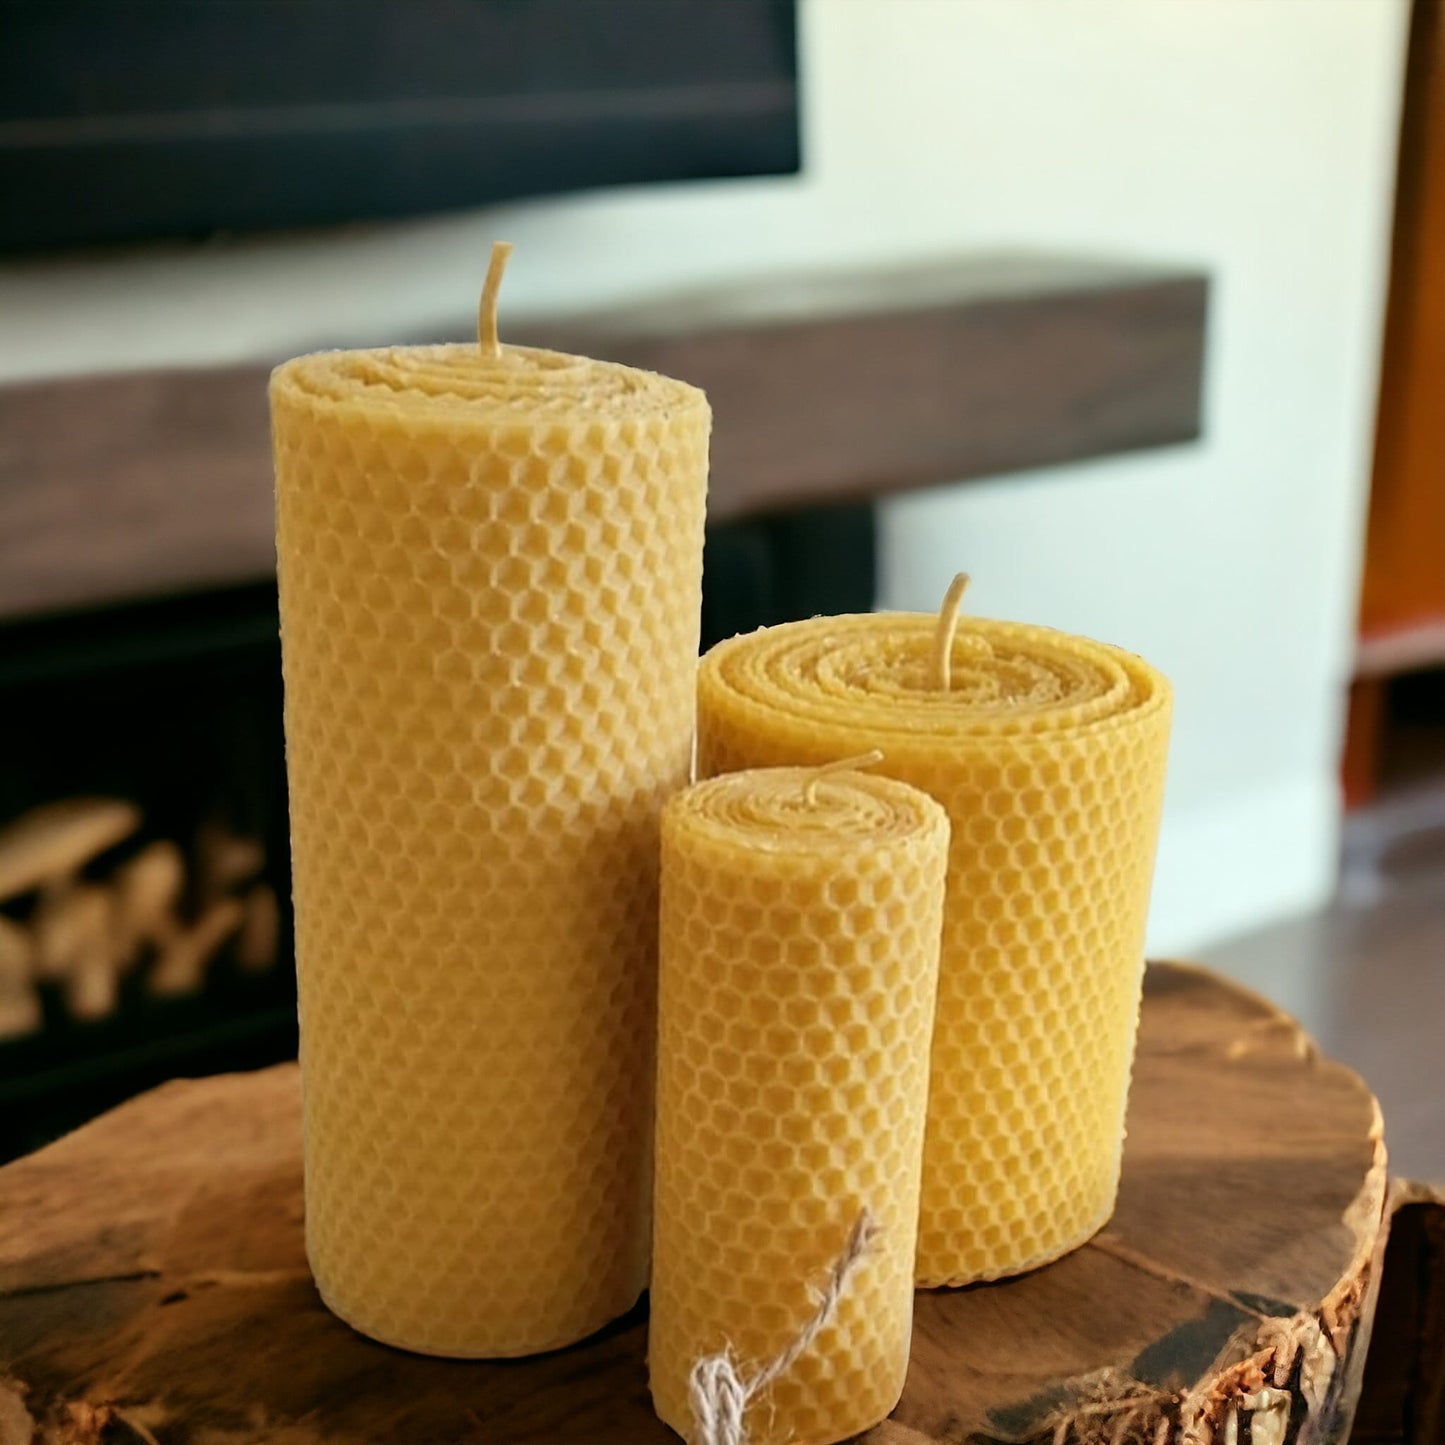 Decor Honeycomb beeswax candles, %100 pure Beeswax Candles, Hand made